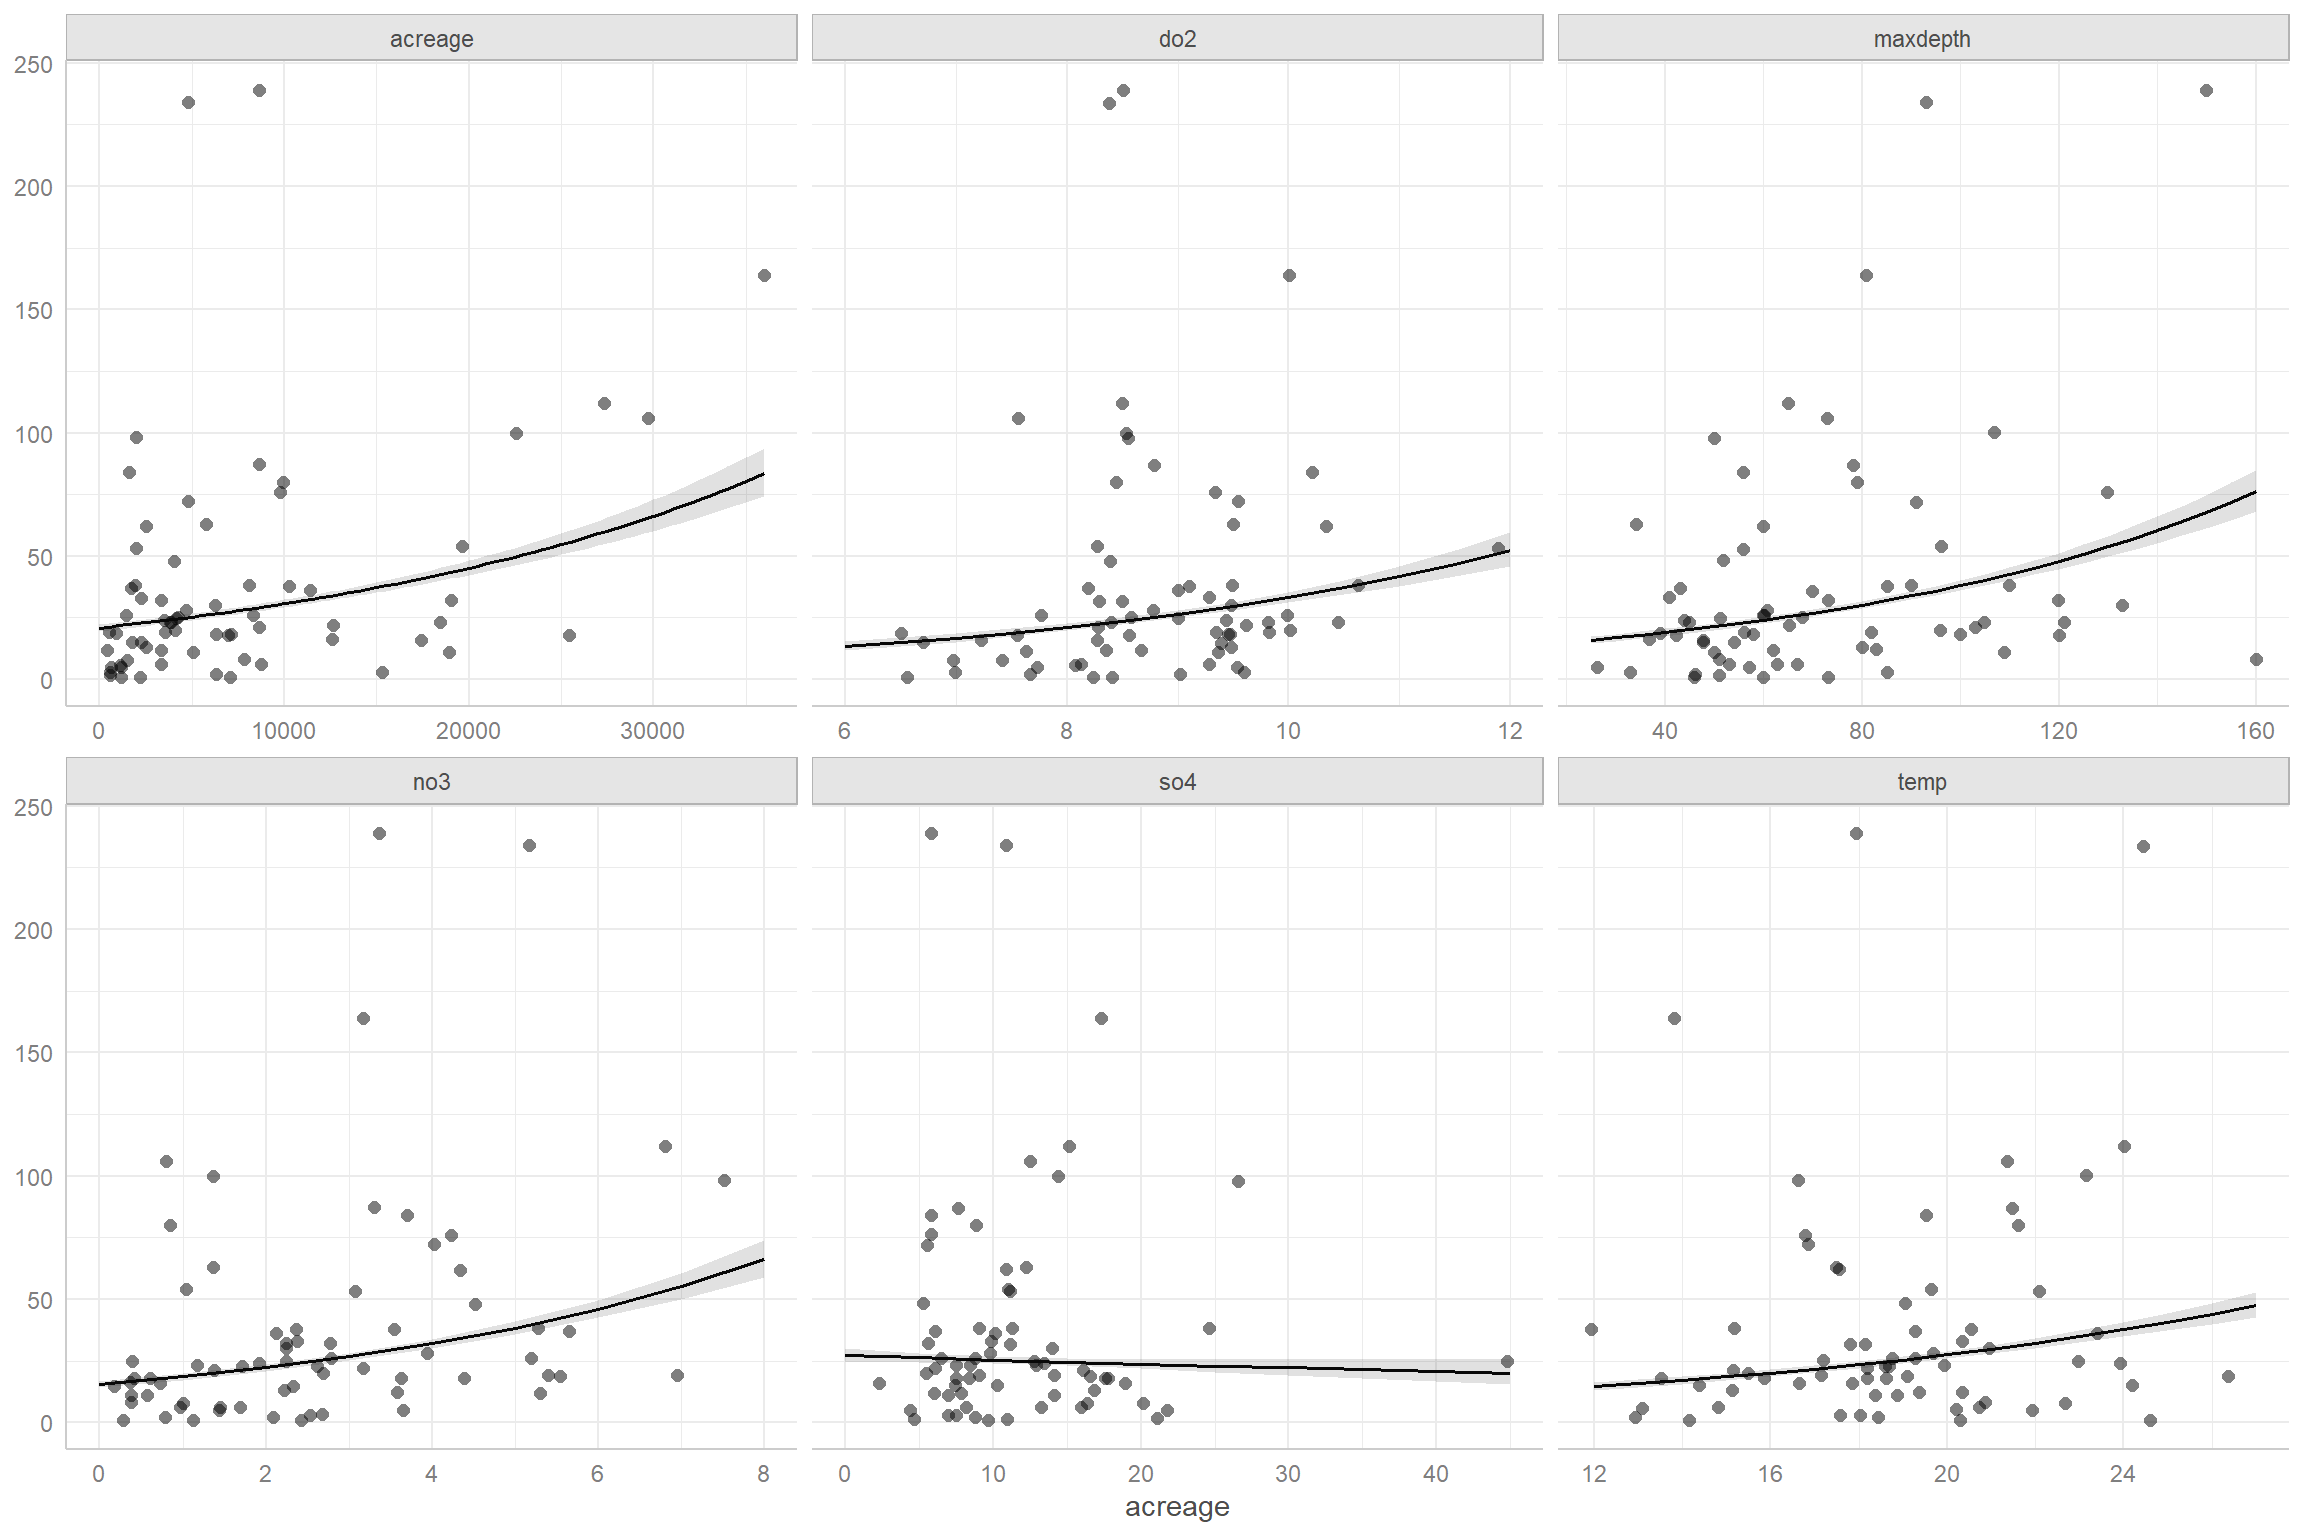 Partial residual plots for the Poisson regression model fit to the longnose dace data.